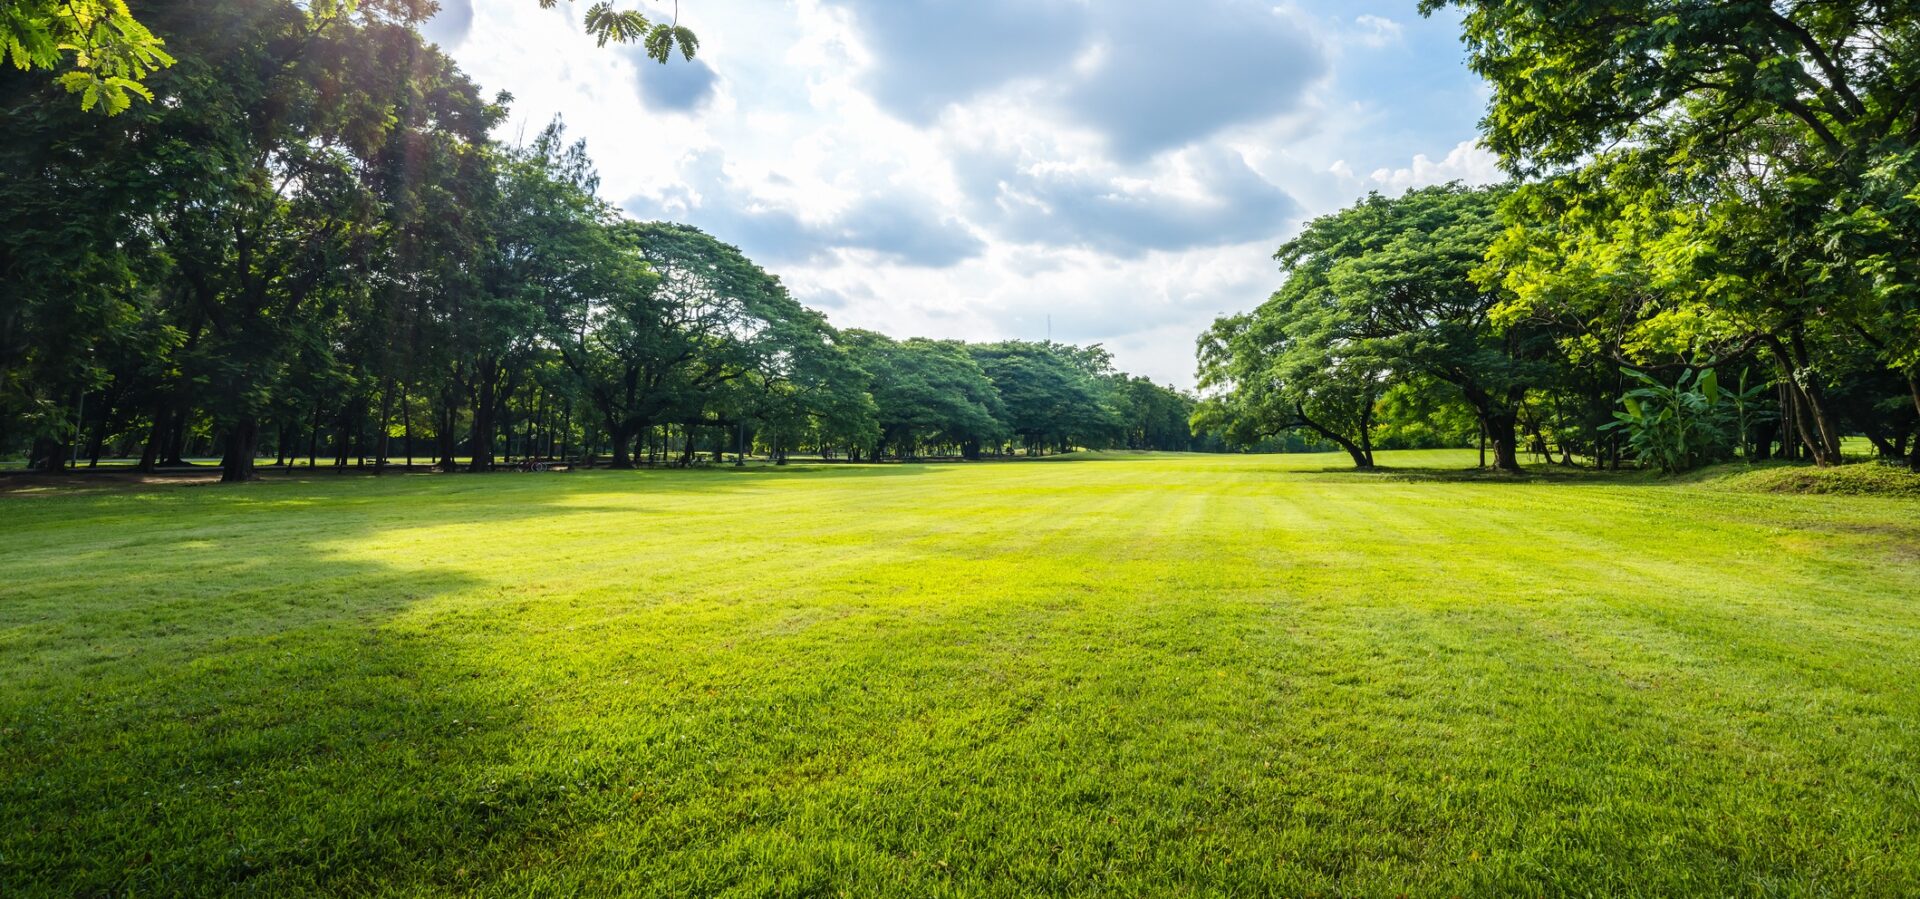 A vibrant, sunlit park with lush green grass and a diverse array of trees stretching towards a bright, partly cloudy sky. Peaceful and inviting.